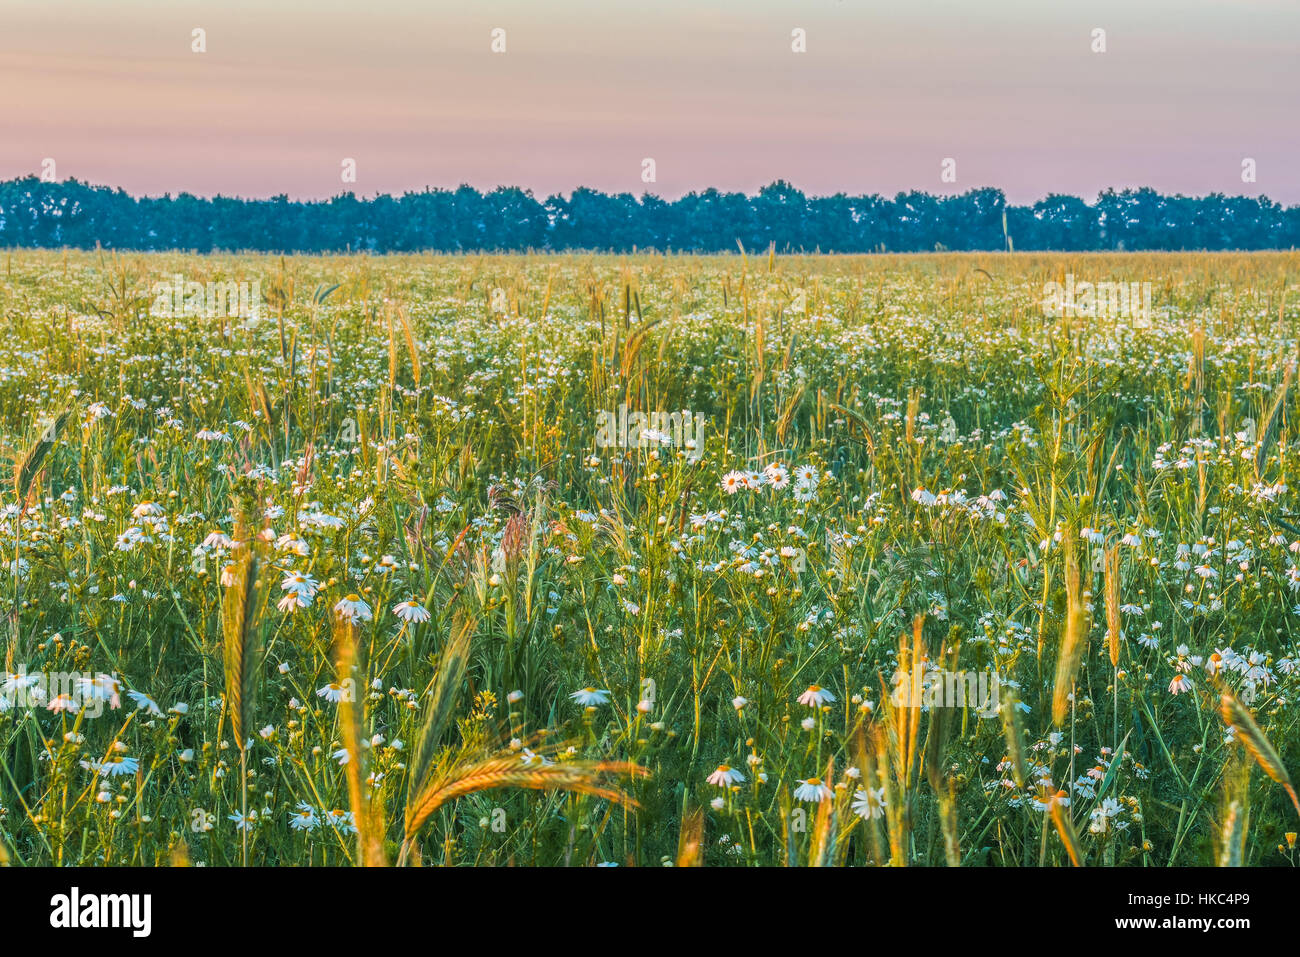 Sunrise in the field with daisies. Stock Photo